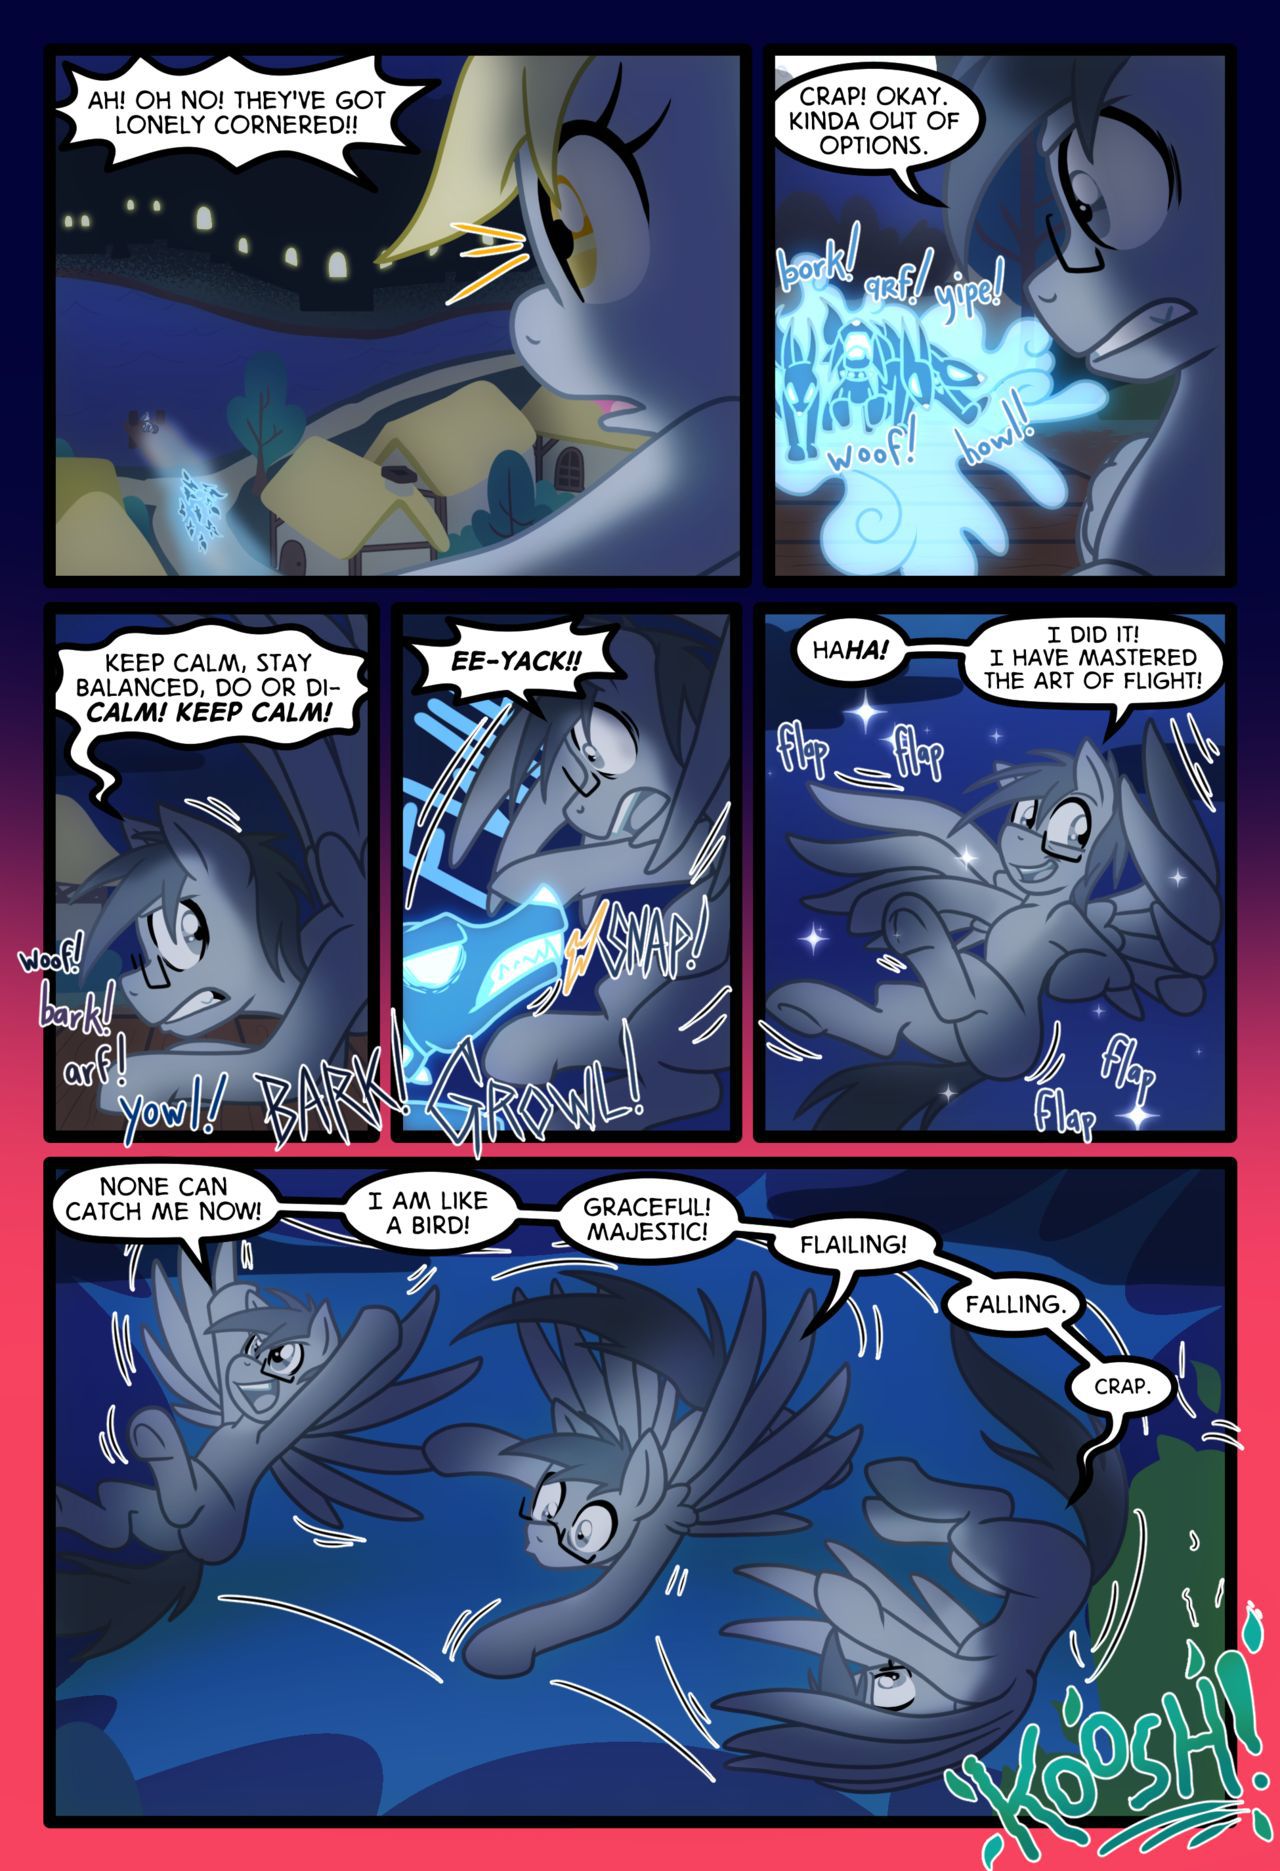 [Zaron] Lonely Hooves (My Little Pony Friendship Is Magic) [Ongoing] 166